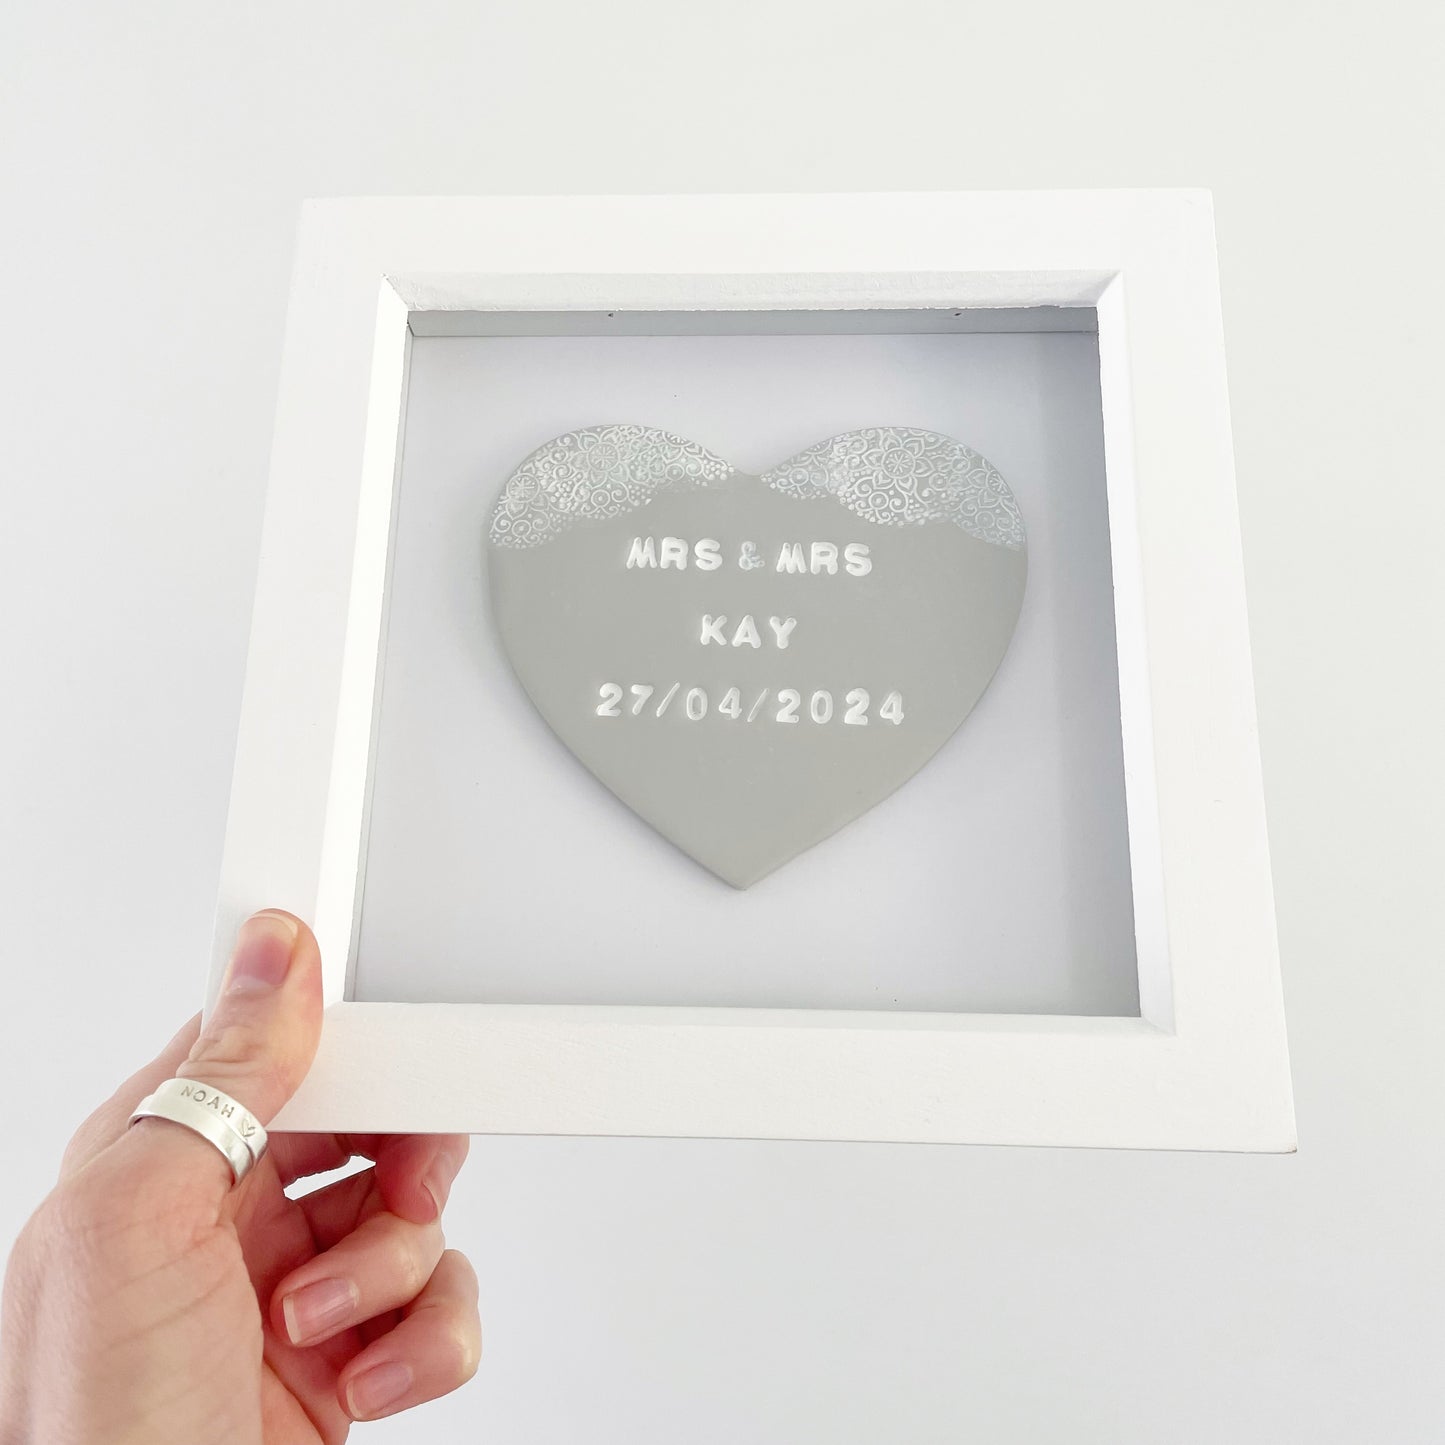 Personalised framed wedding gift, grey clay heart with a white lace edge at the top of the heart in a white box frame, the heart is personalised with MRS & MRS KAY 27/04/2024